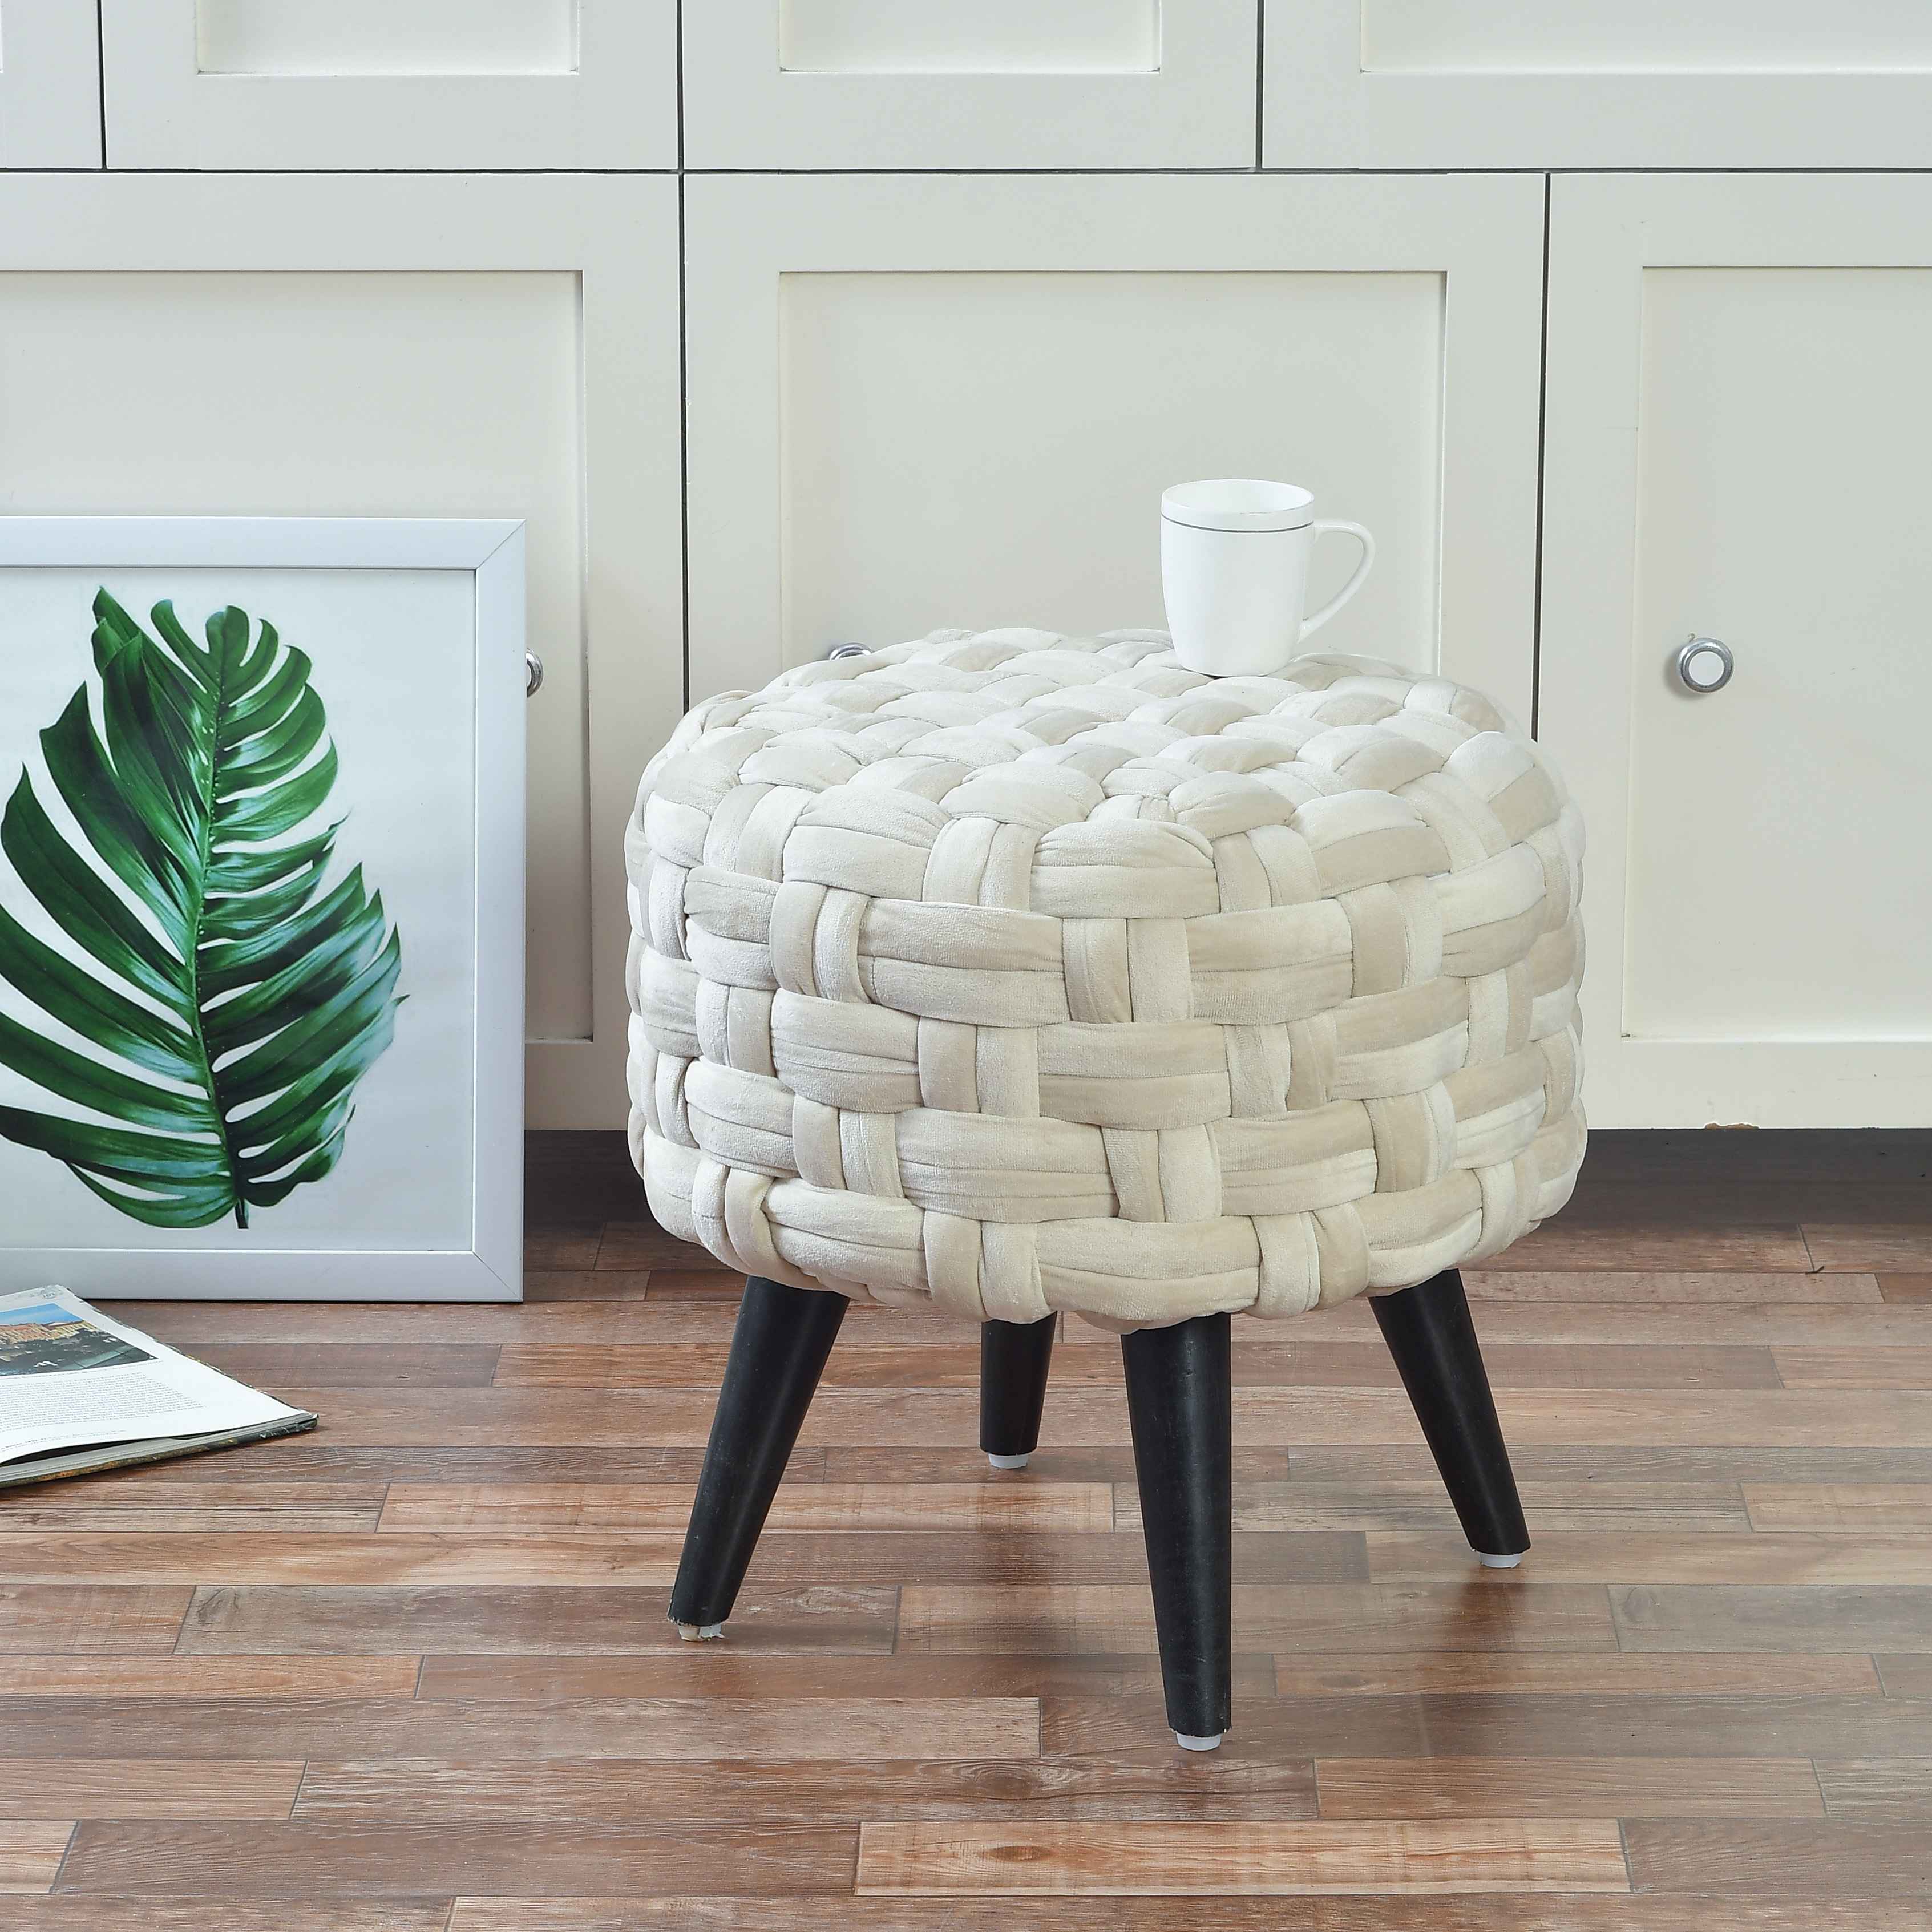 Patterned Paragon Ottomans 11